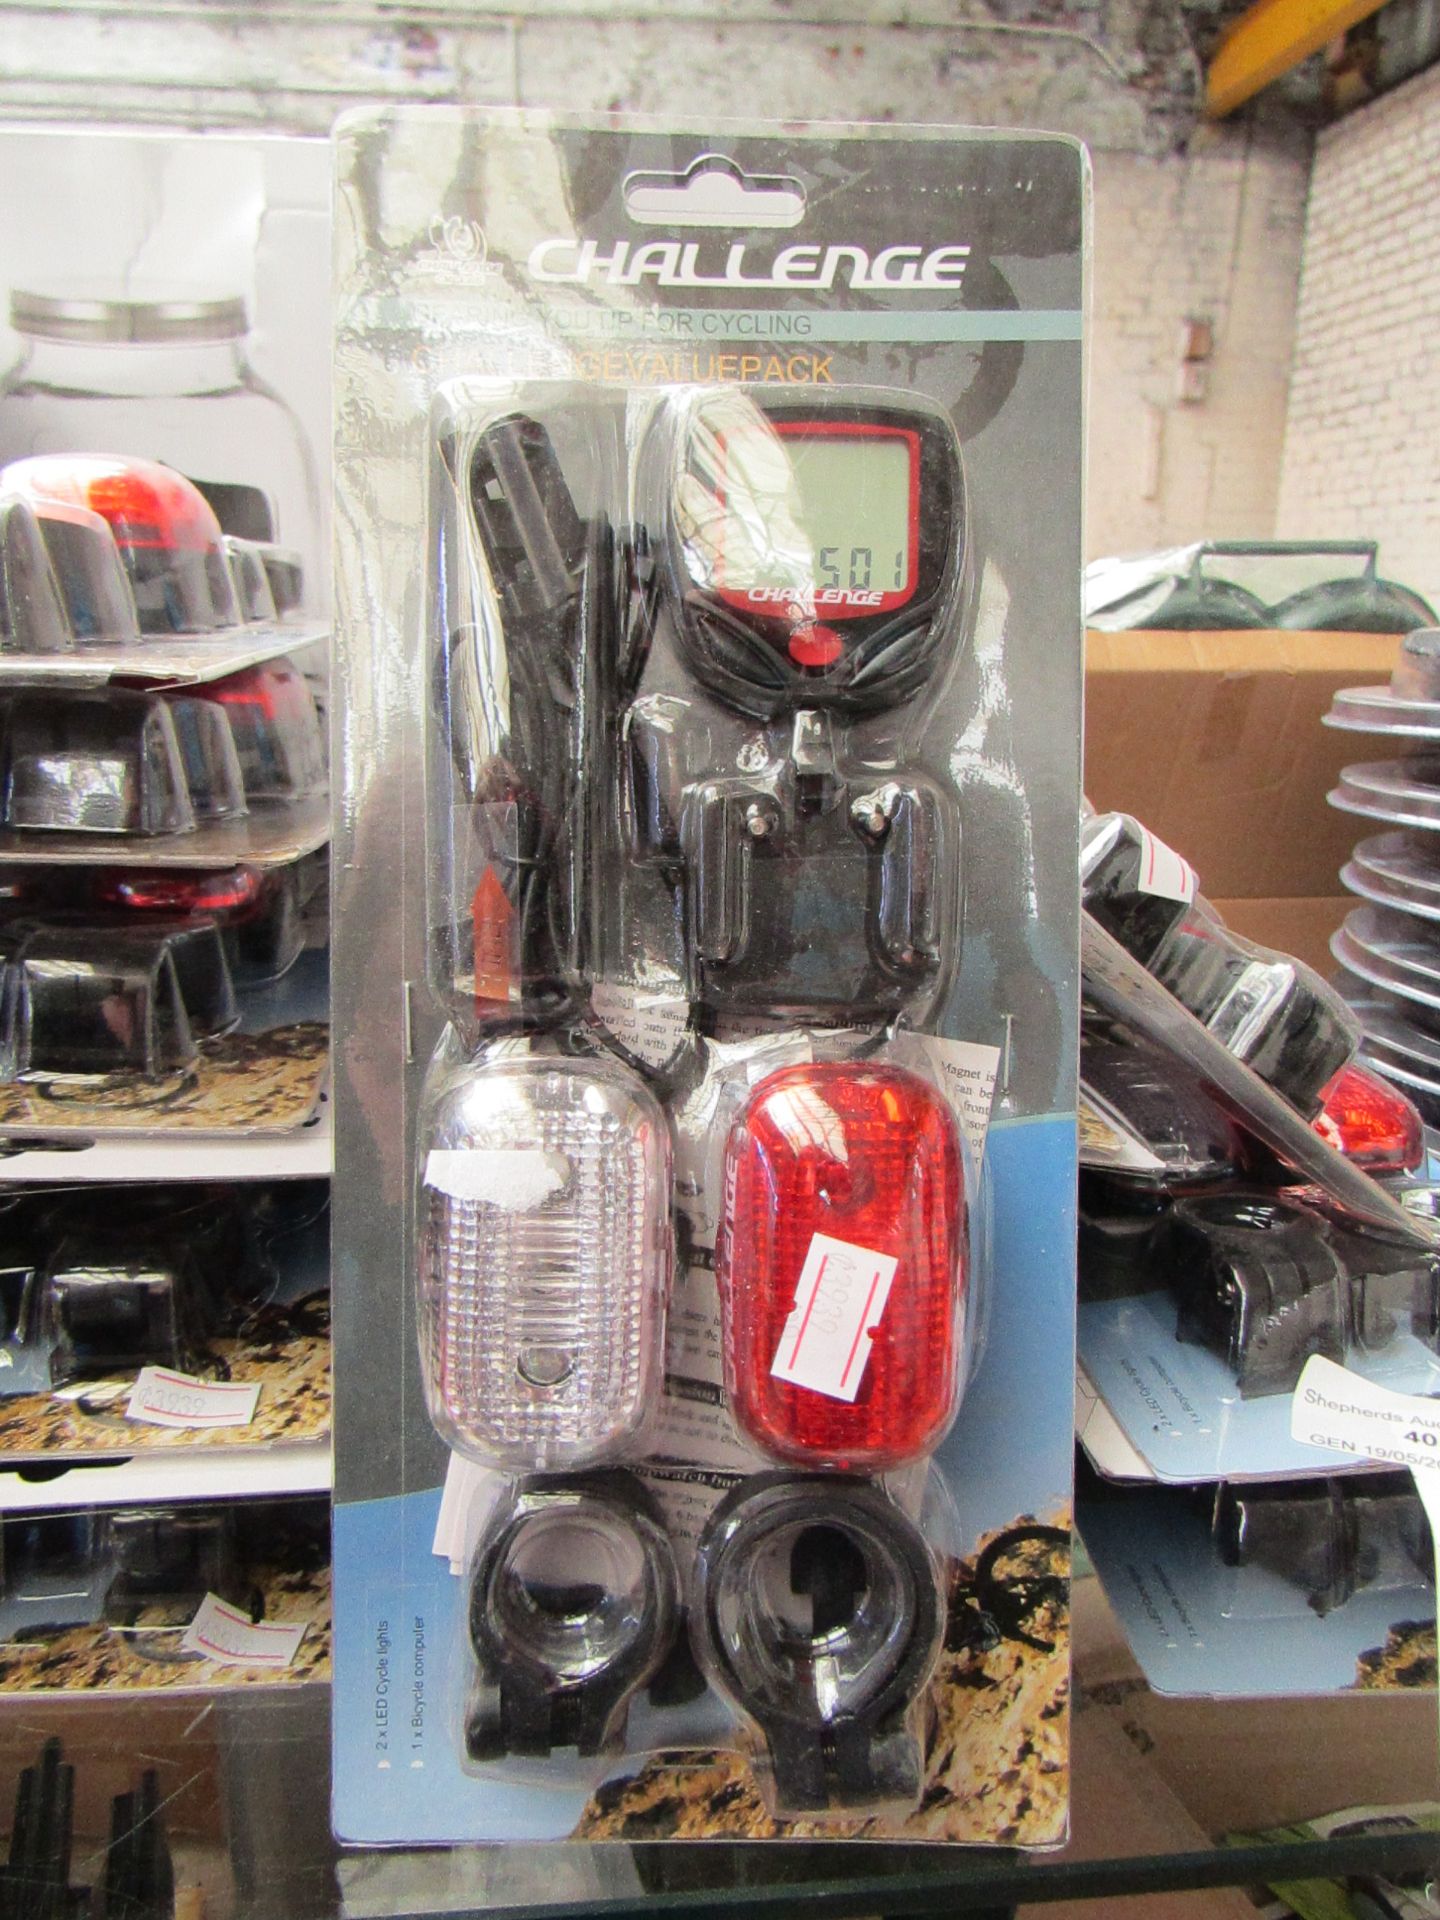 2 x Challenge Bike Light Sets inc.. 2 X LED Cycle lights 1 X Bicycle Computer new & packaged